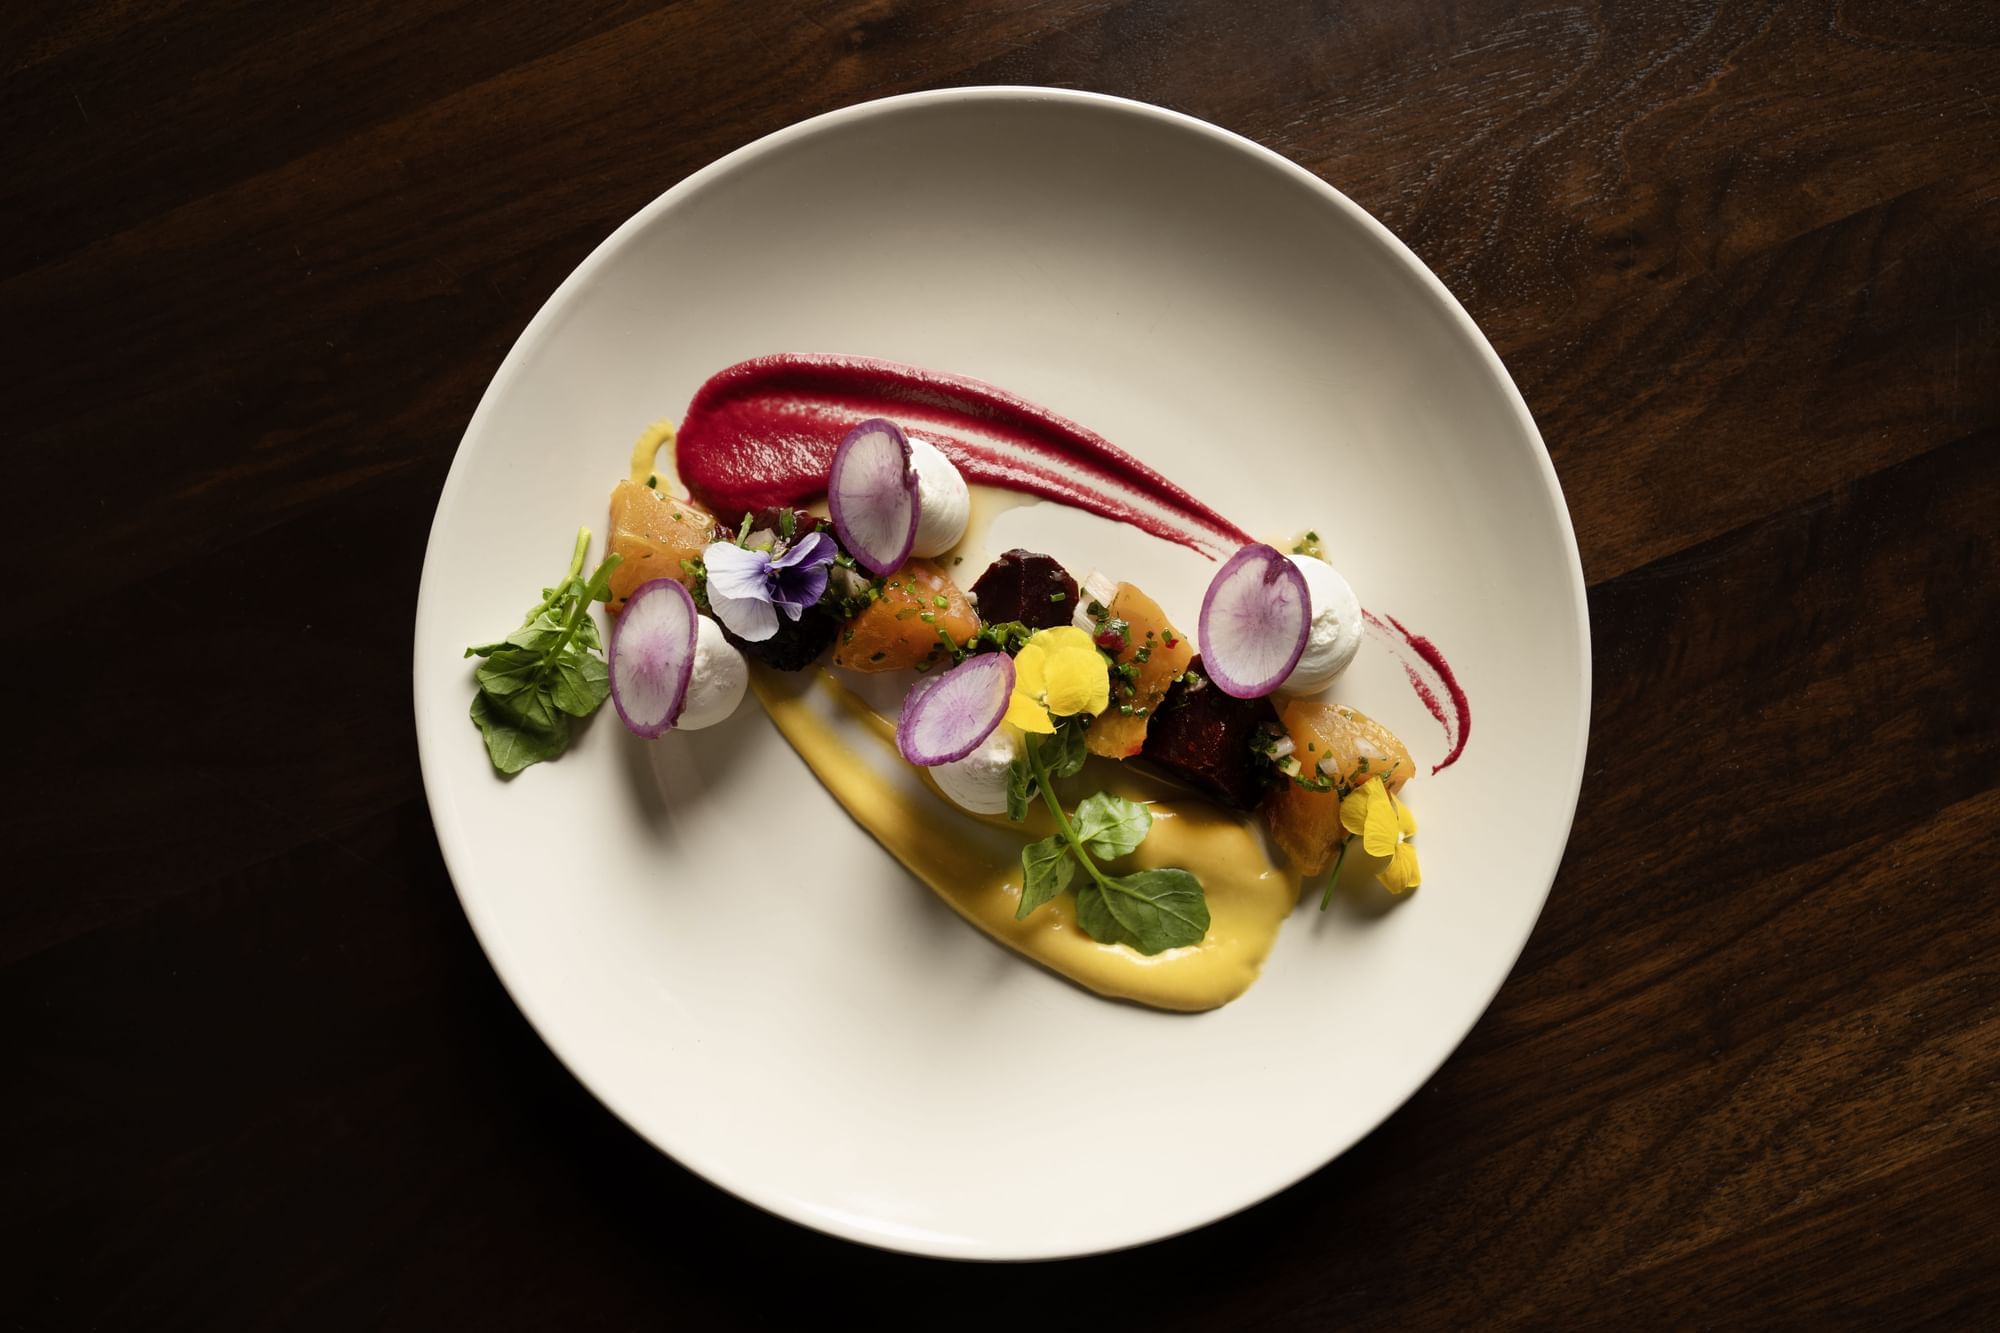 A beet salad with oven-roasted red & yellow beets, goat cheese mousse, radish, fennel, espelette pepper 